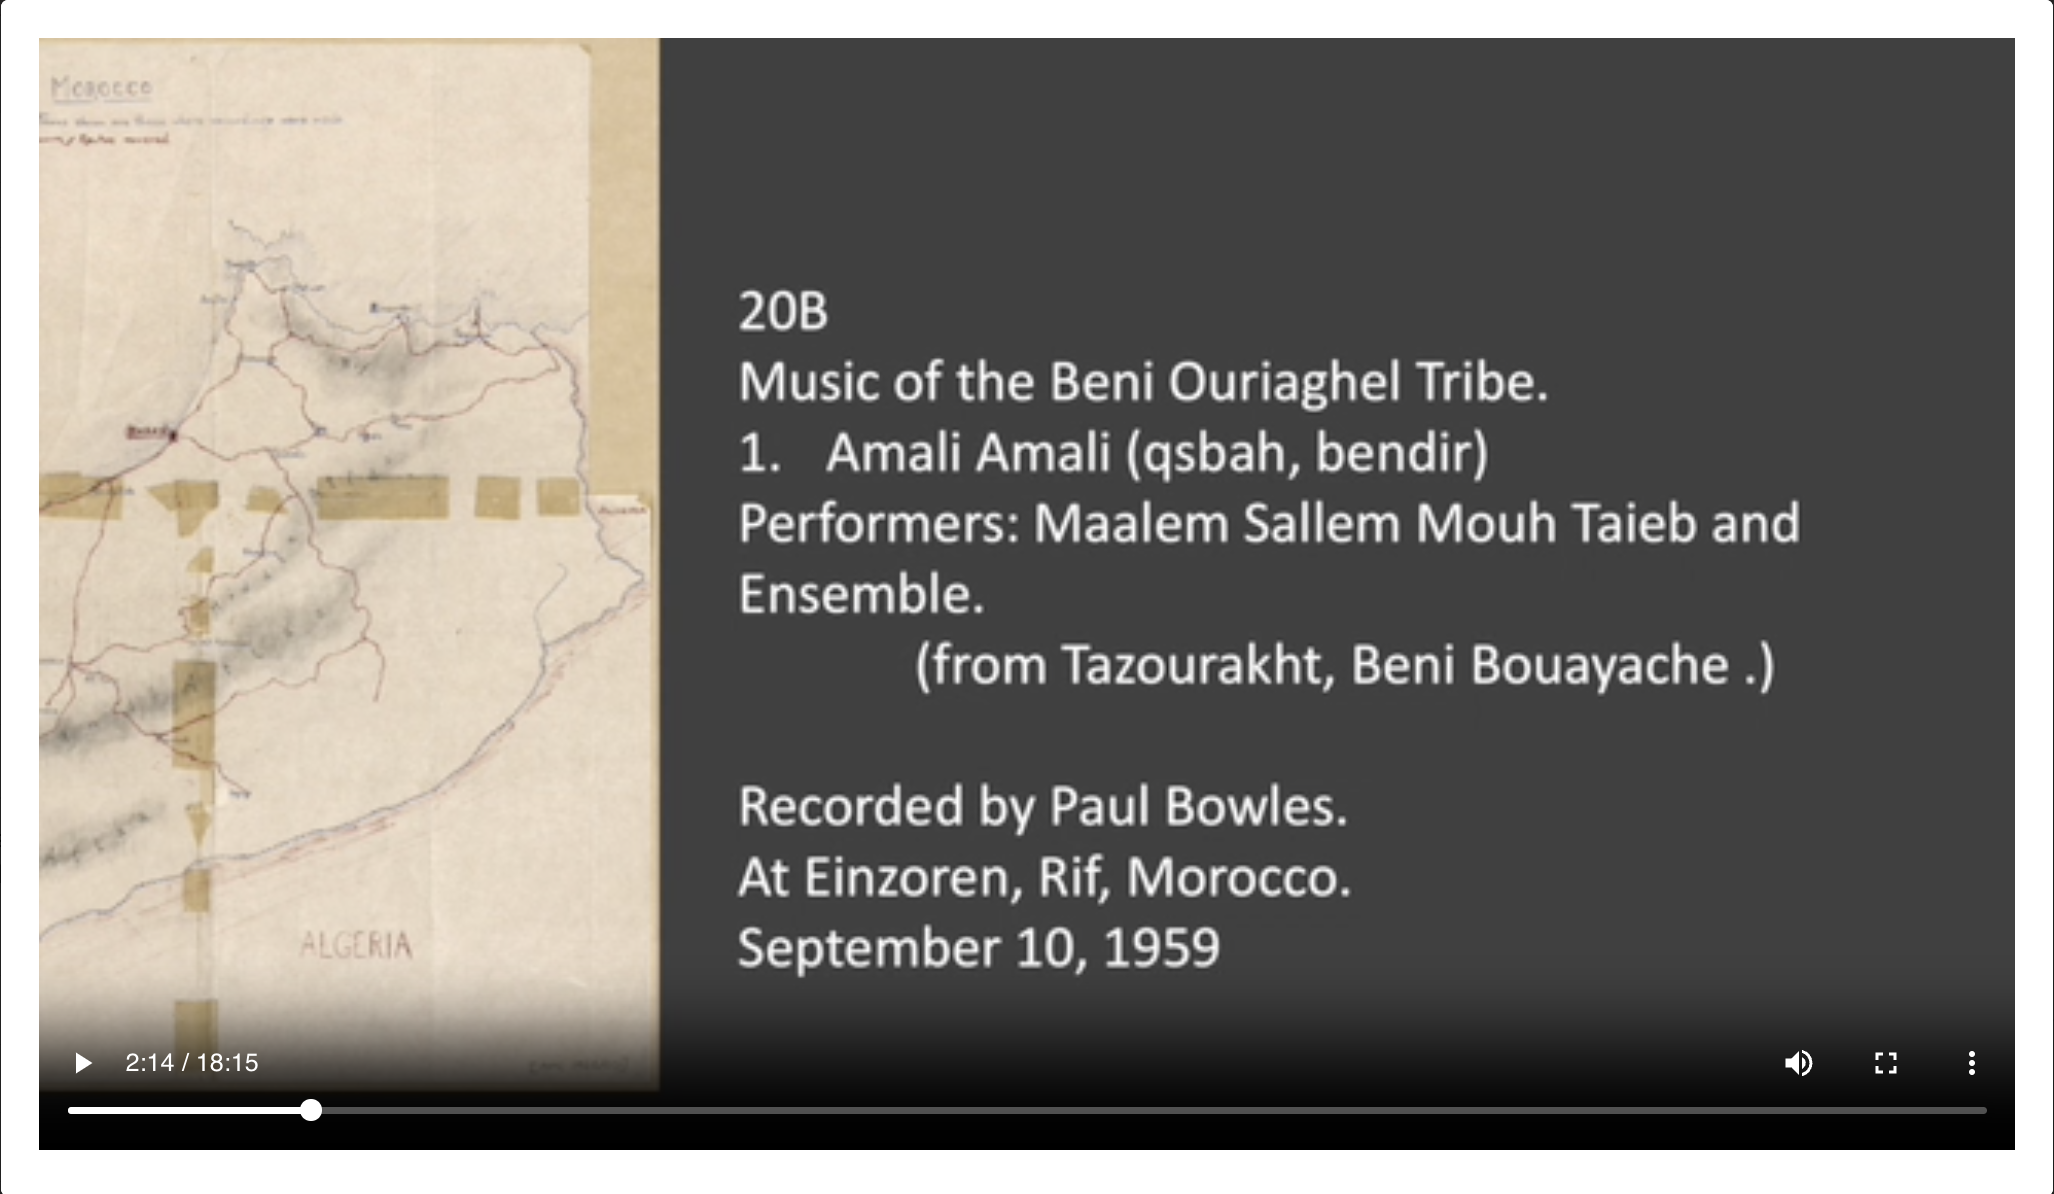 <p>20B 1 Amali Amali (qsbah, bendir) Performers: Maalem Sallem Mouh Taieb and Ensemble. (from Tazourakht, Beni Bouayache.) Music of the Beni Ouriaghel Tribe. Recorded by Paul Bowles. At Einzoren, Rif, Morocco. September 10, 1959</p>